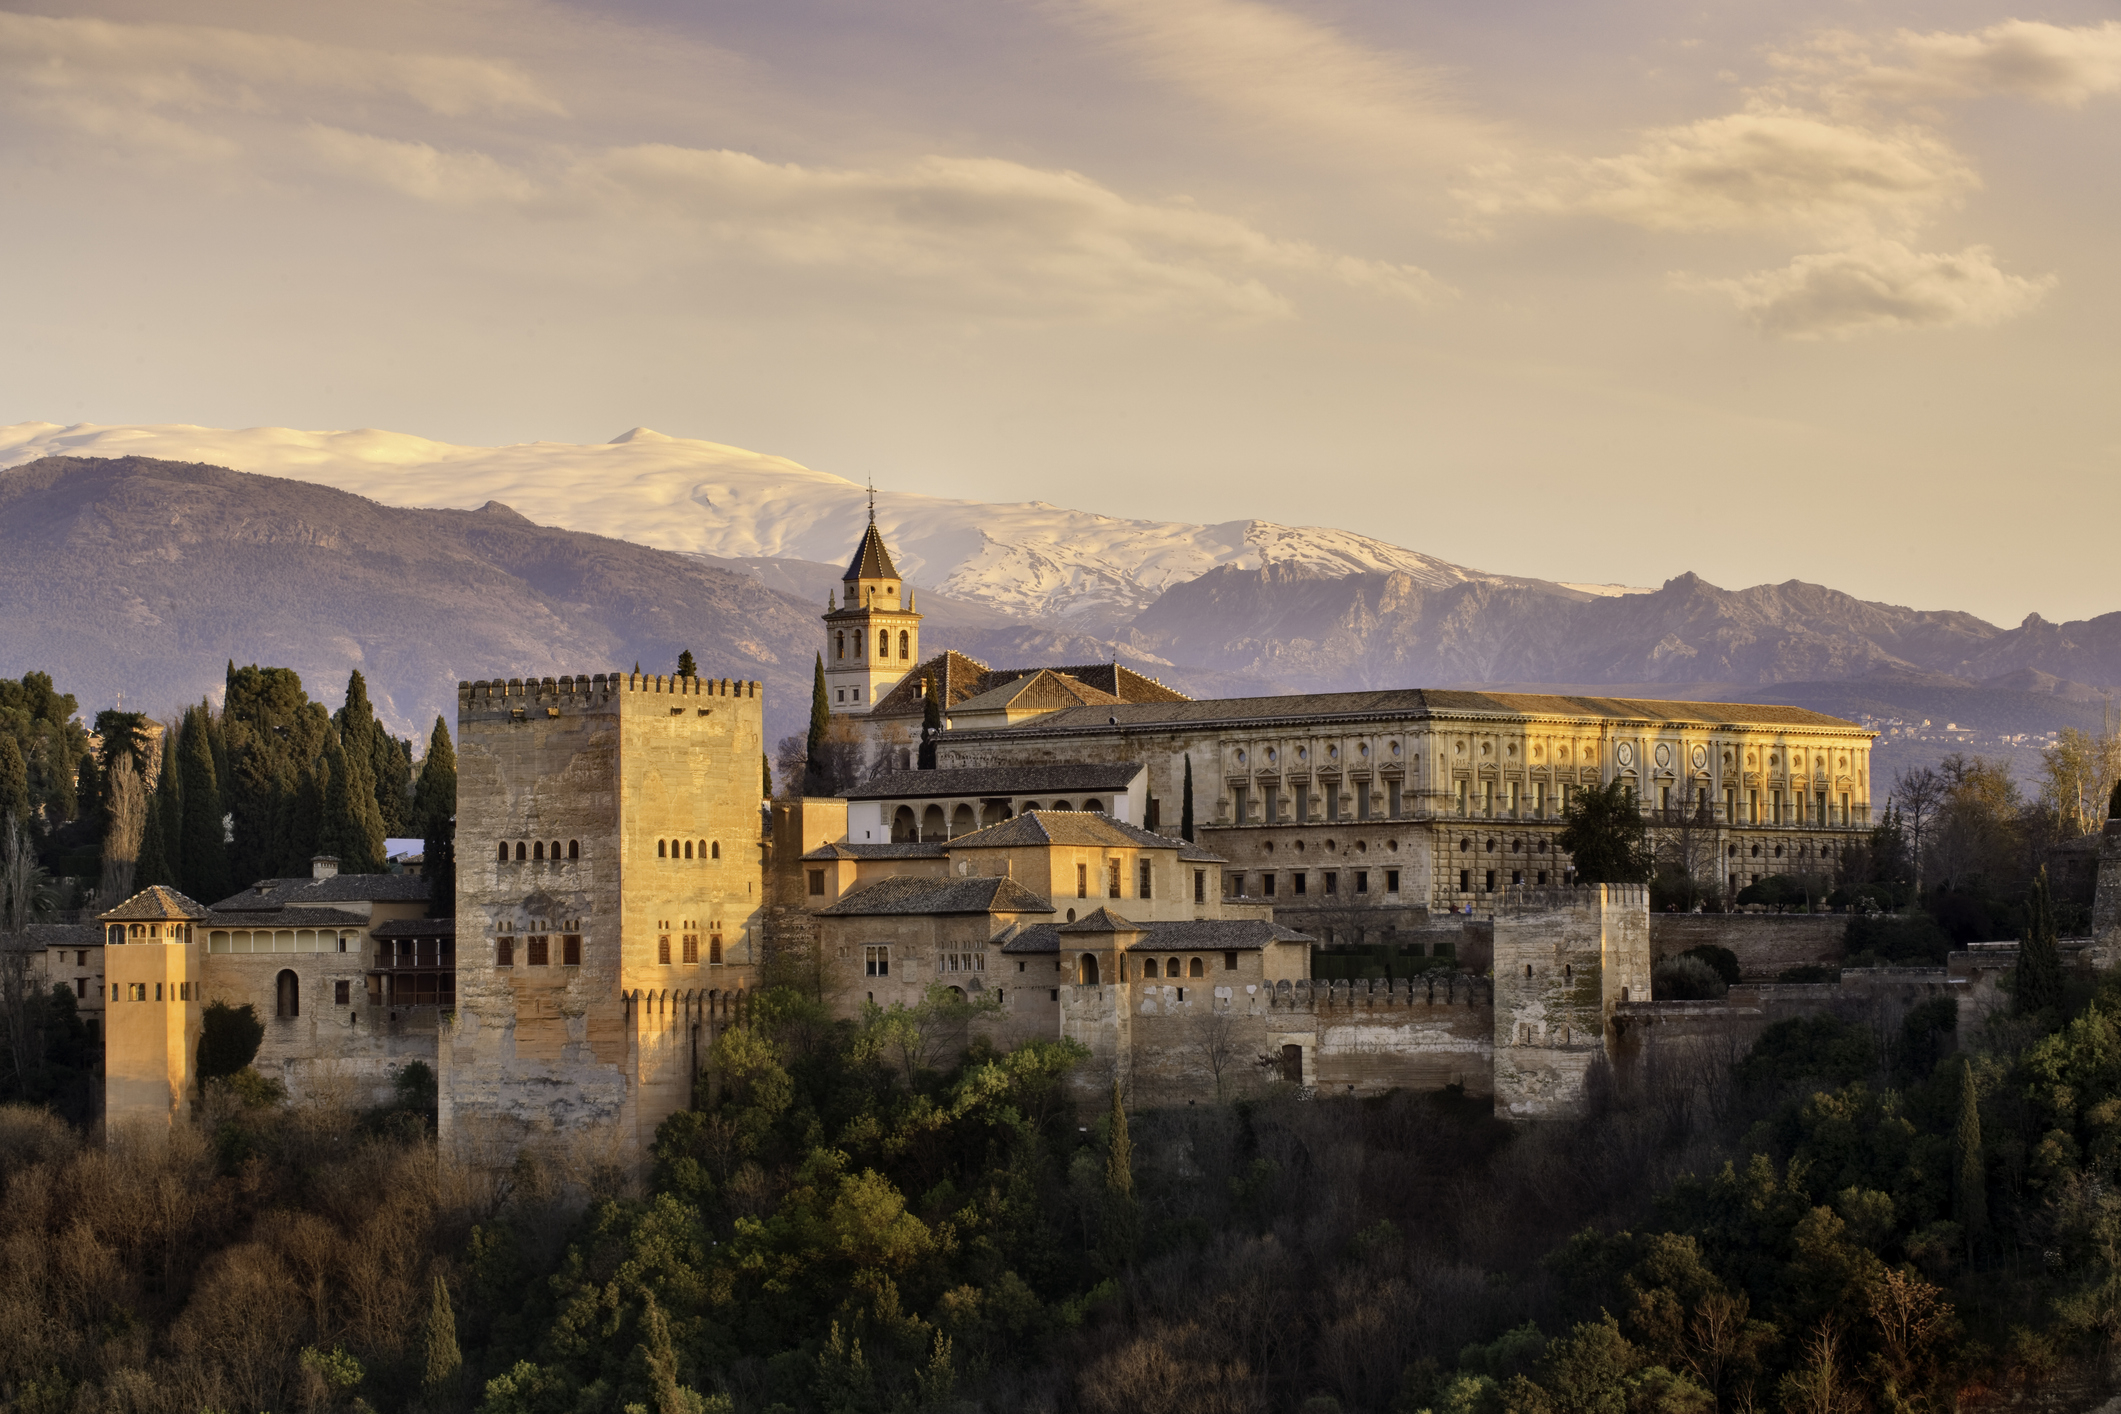 Historic Alhambra palace with background mountains at sunset